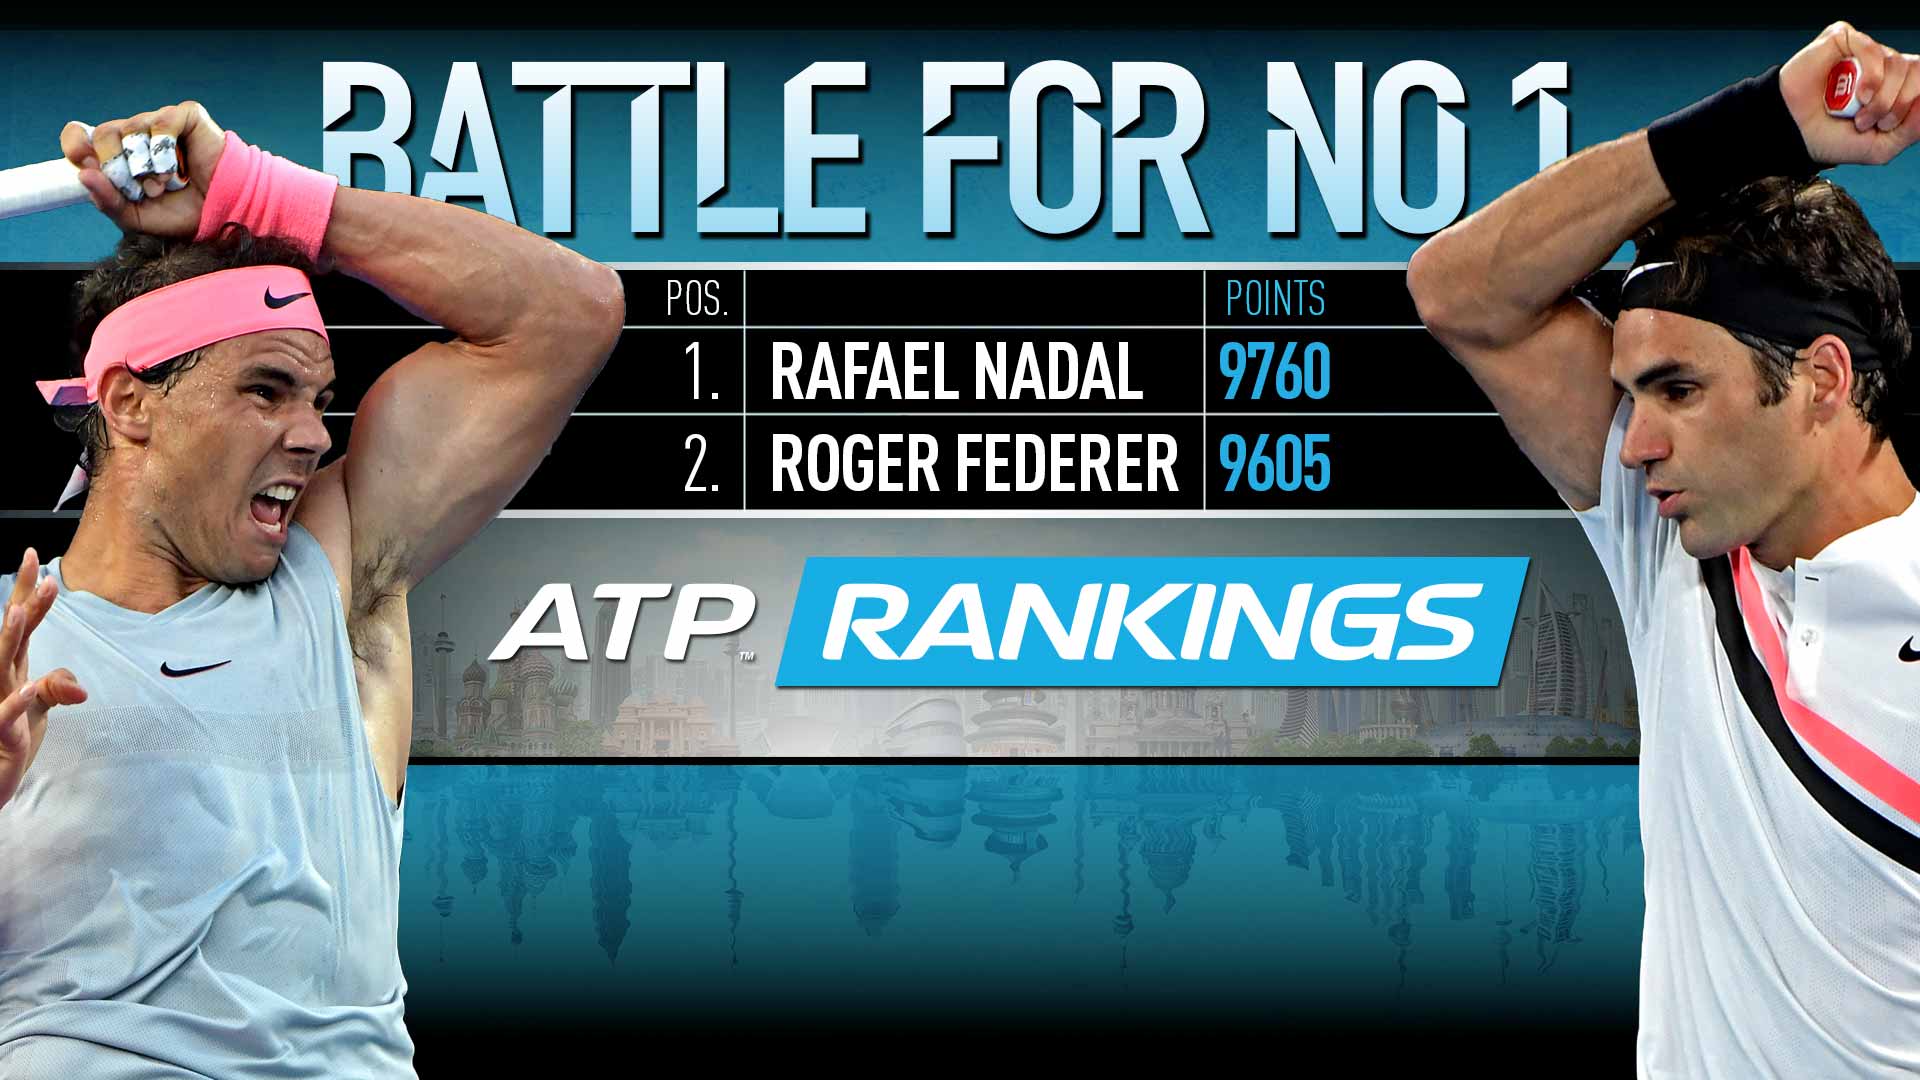 After retaining his Australian Open title, Roger Federer has a chance to overtake Rafael Nadal as No. 1 in the ATP Rankings.